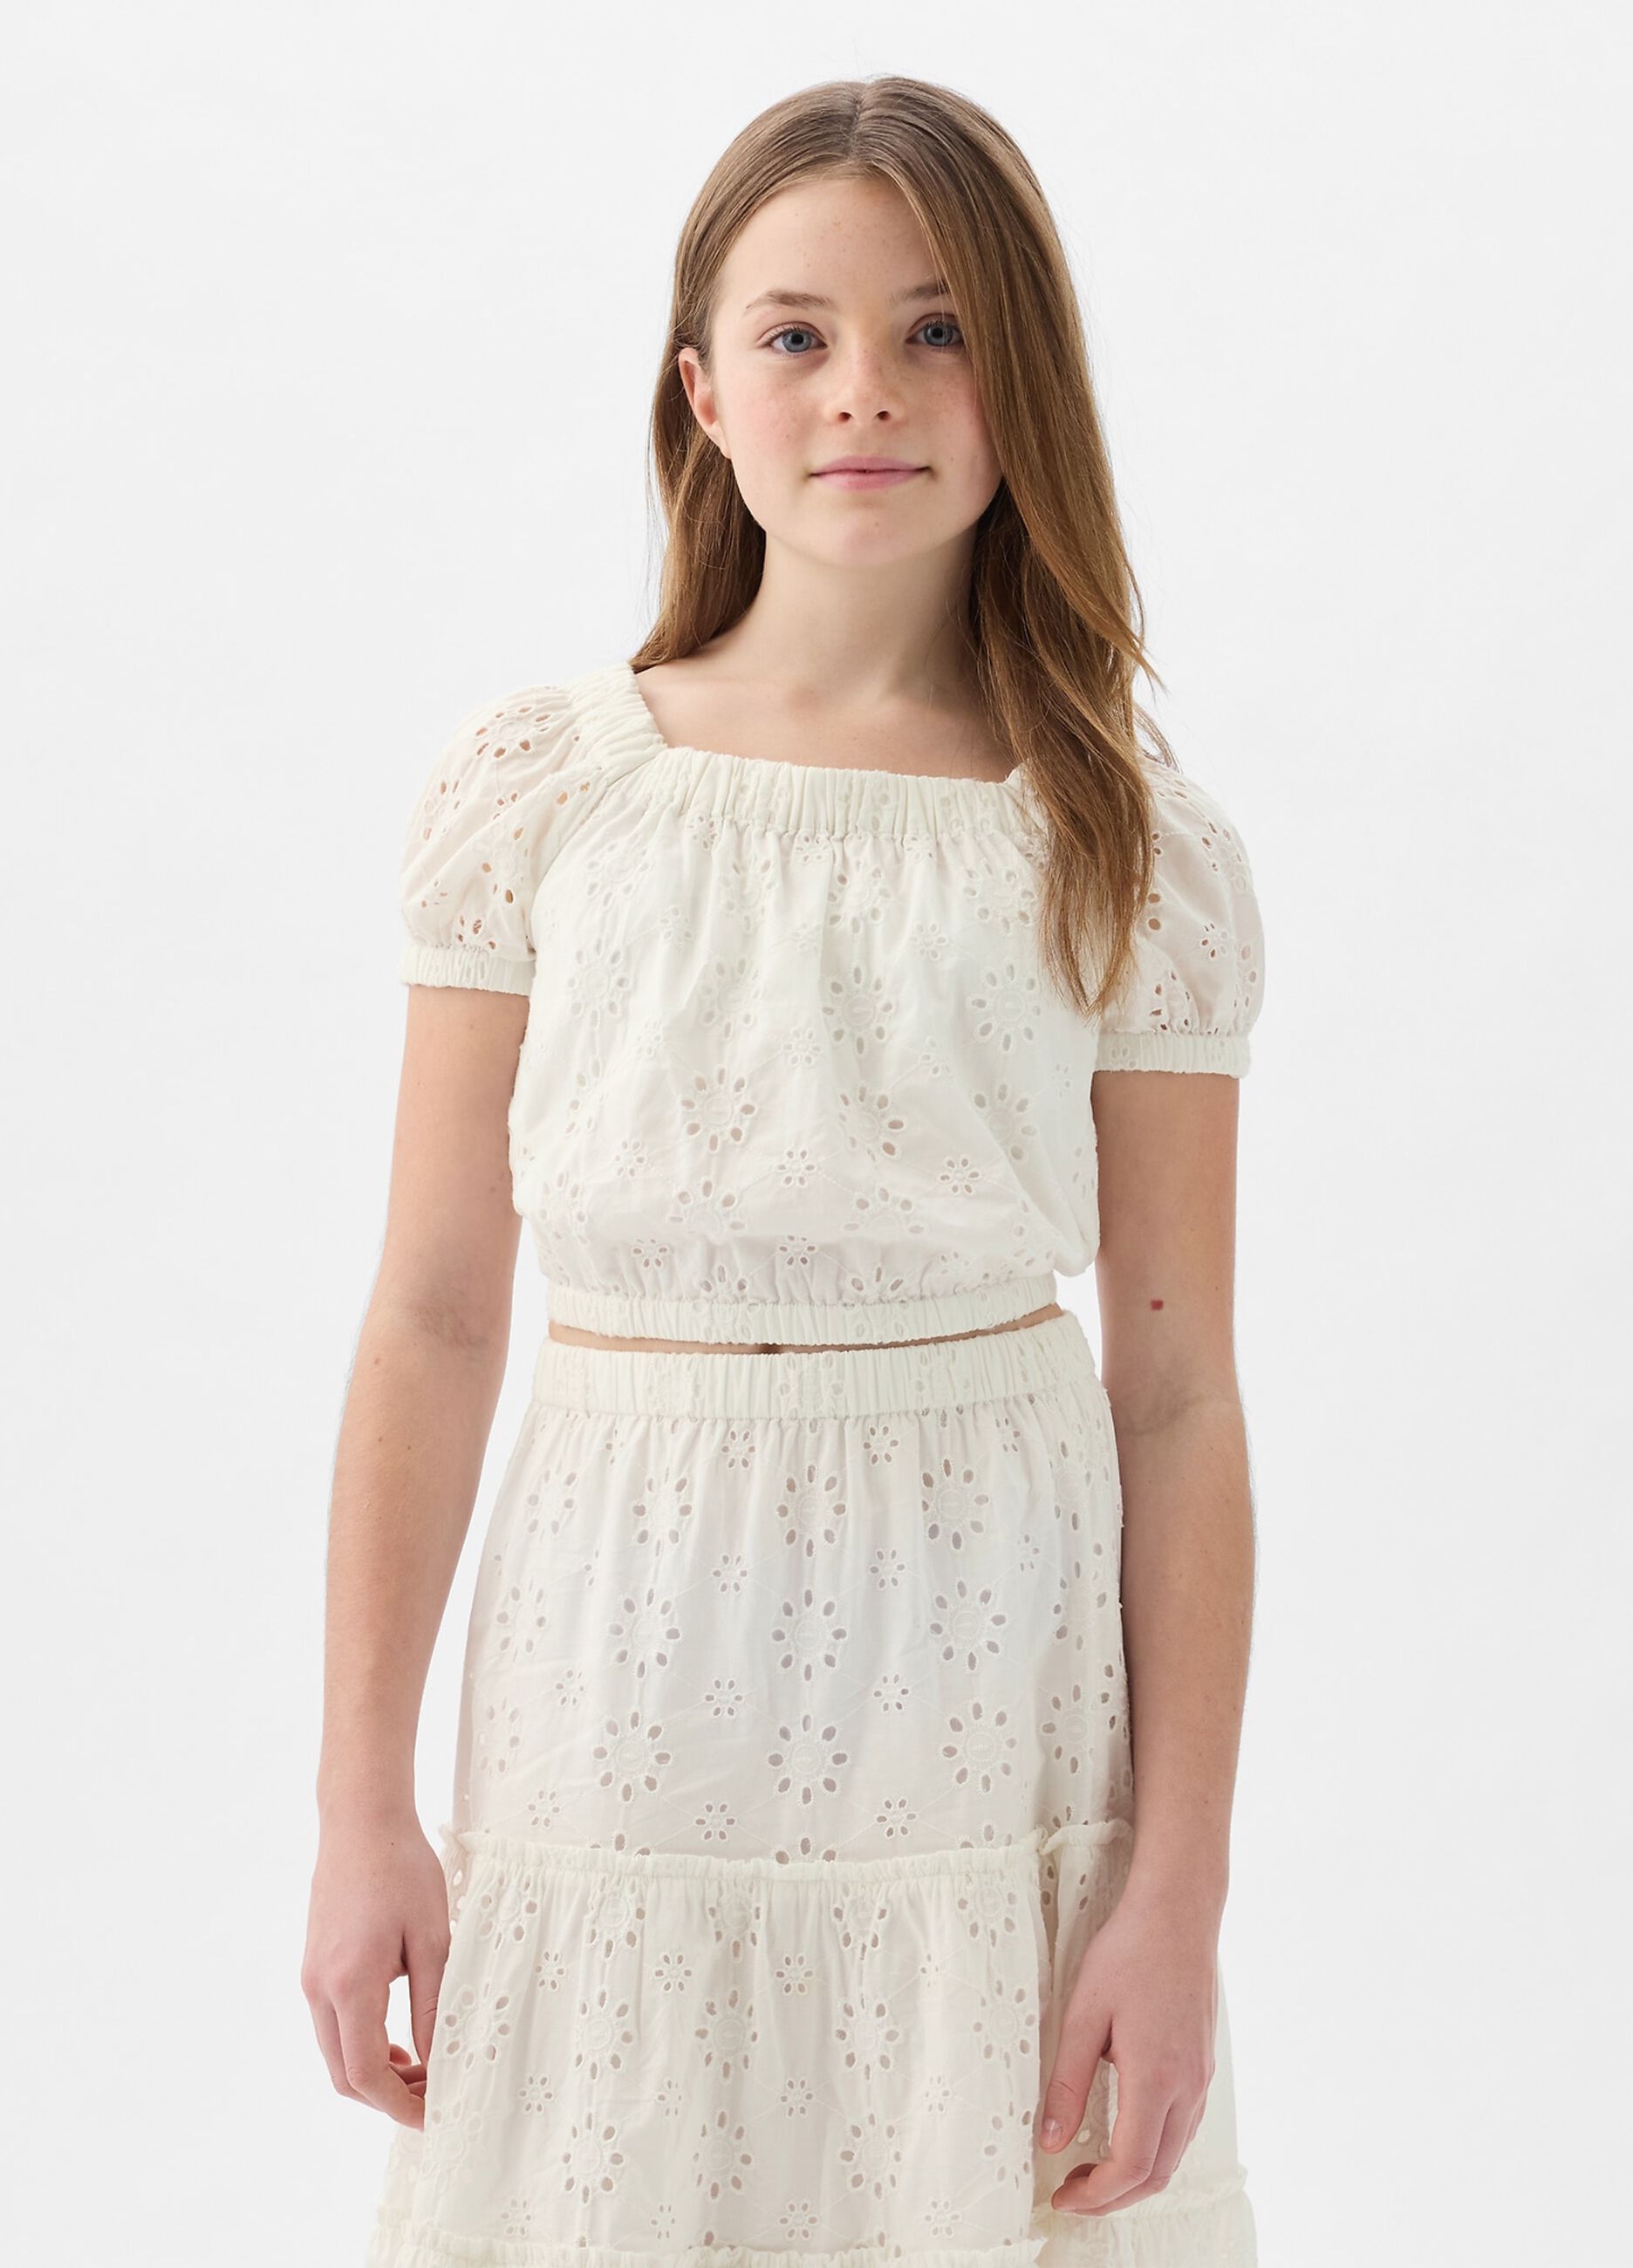 Crop top in broderie anglaise with puff sleeves